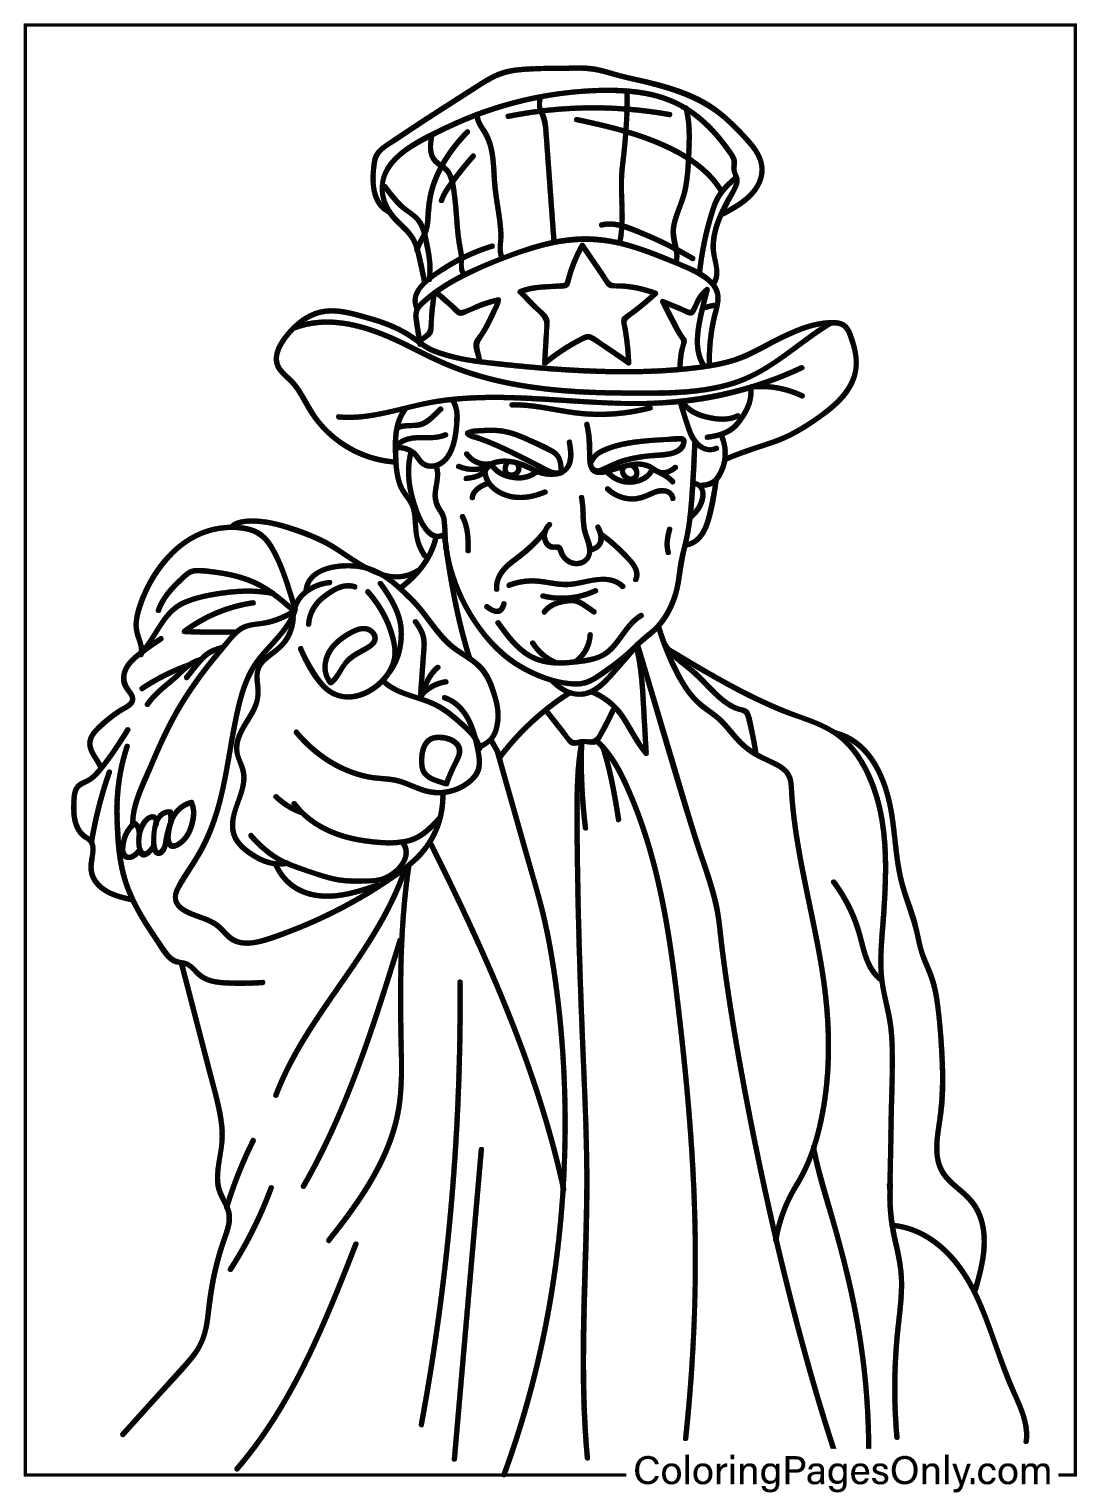 Donald Trump Coloring Page PDF from Donald Trump